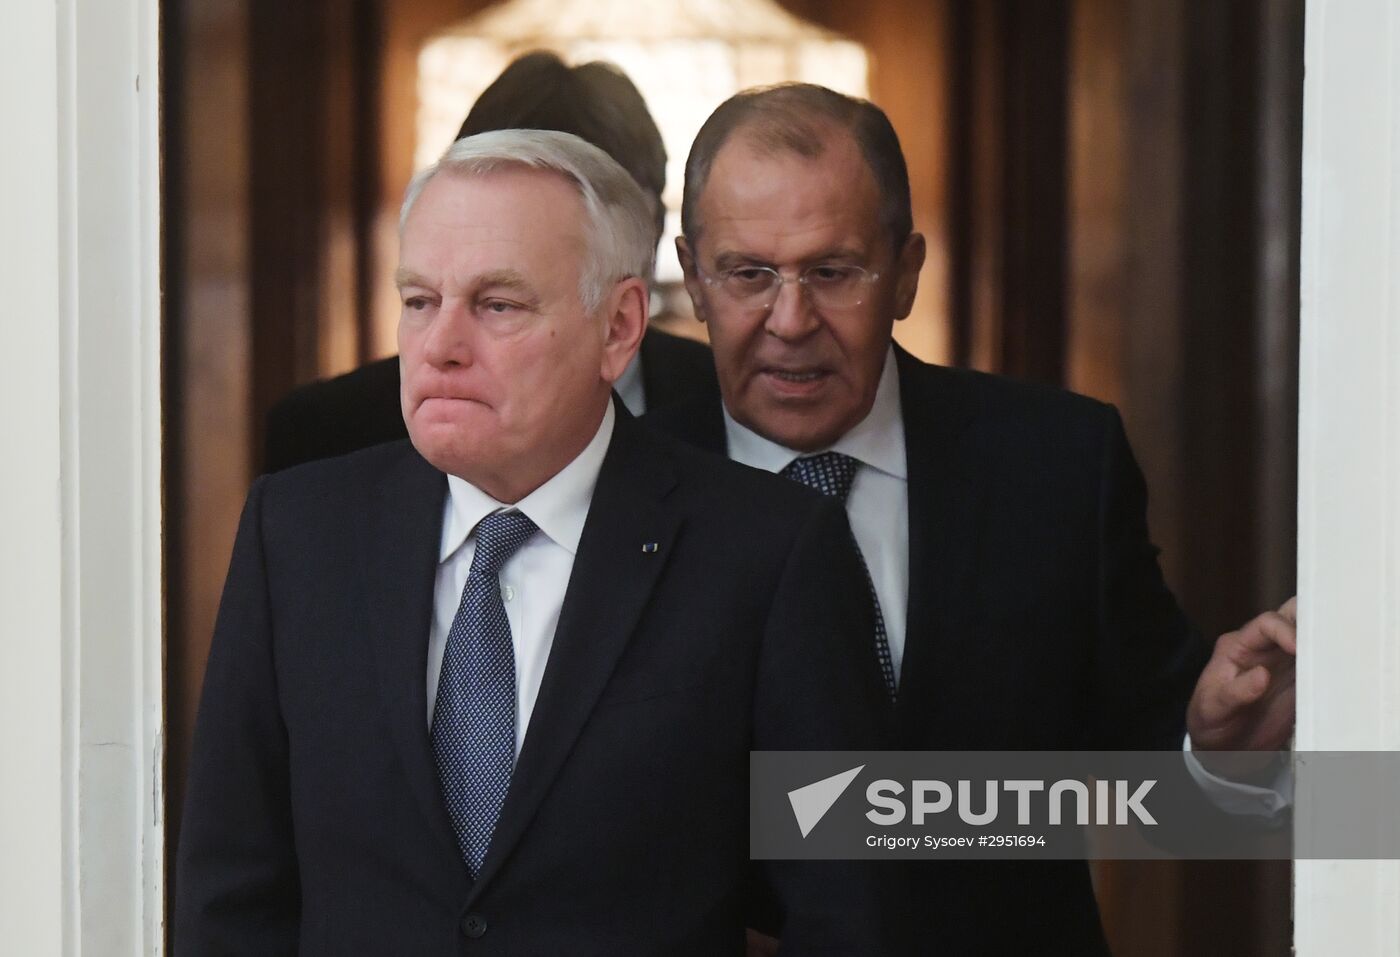 Russian and French Foreign Ministers Sergei Lavrov and Jean-Marc Ayrault meeting